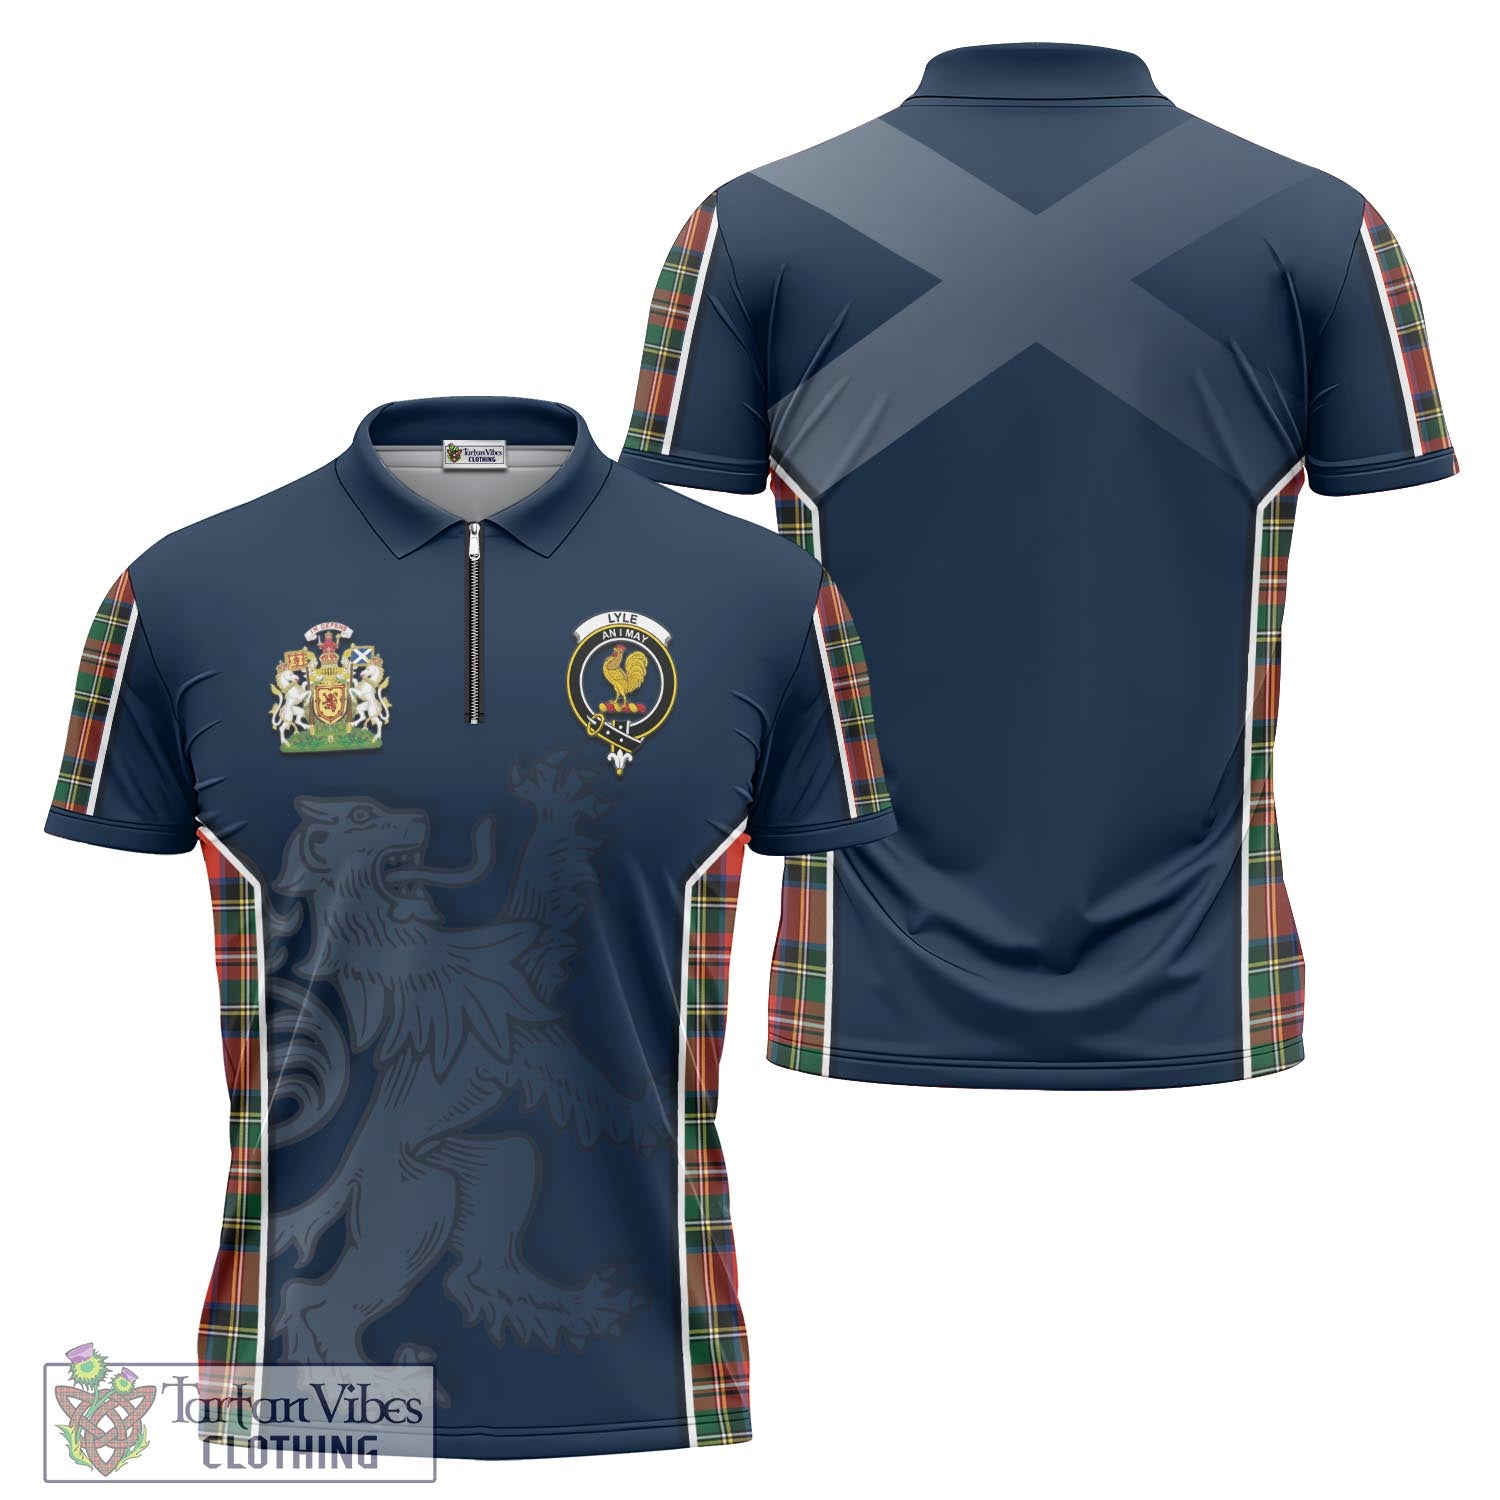 Tartan Vibes Clothing Lyle Tartan Zipper Polo Shirt with Family Crest and Lion Rampant Vibes Sport Style